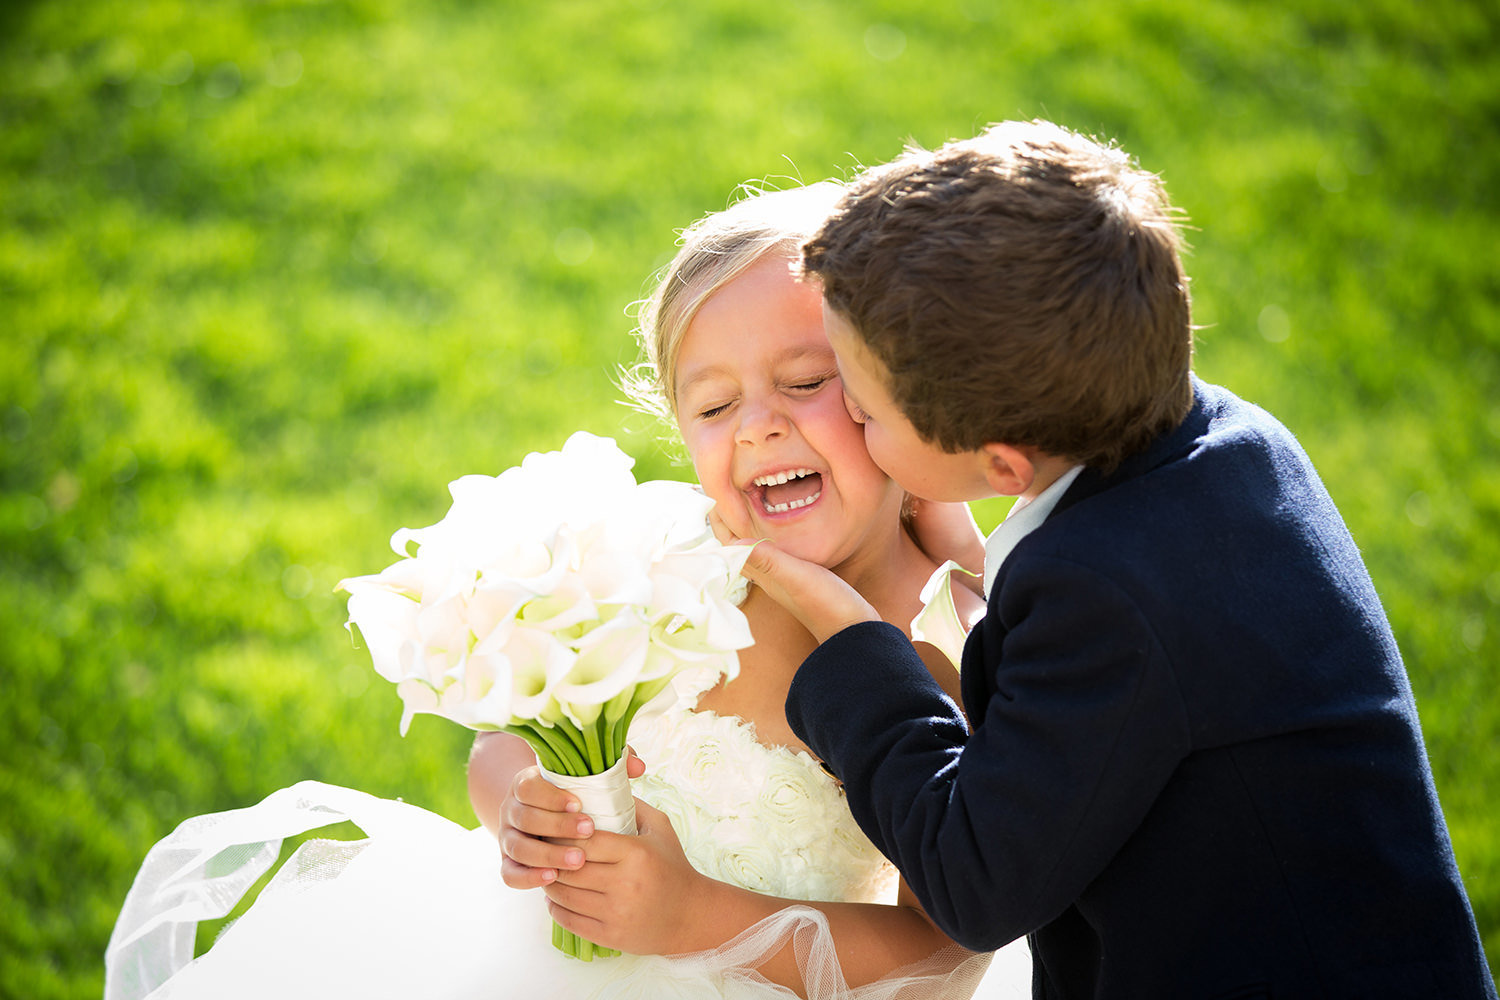 Sweet moment between the flower girl and ring bearer